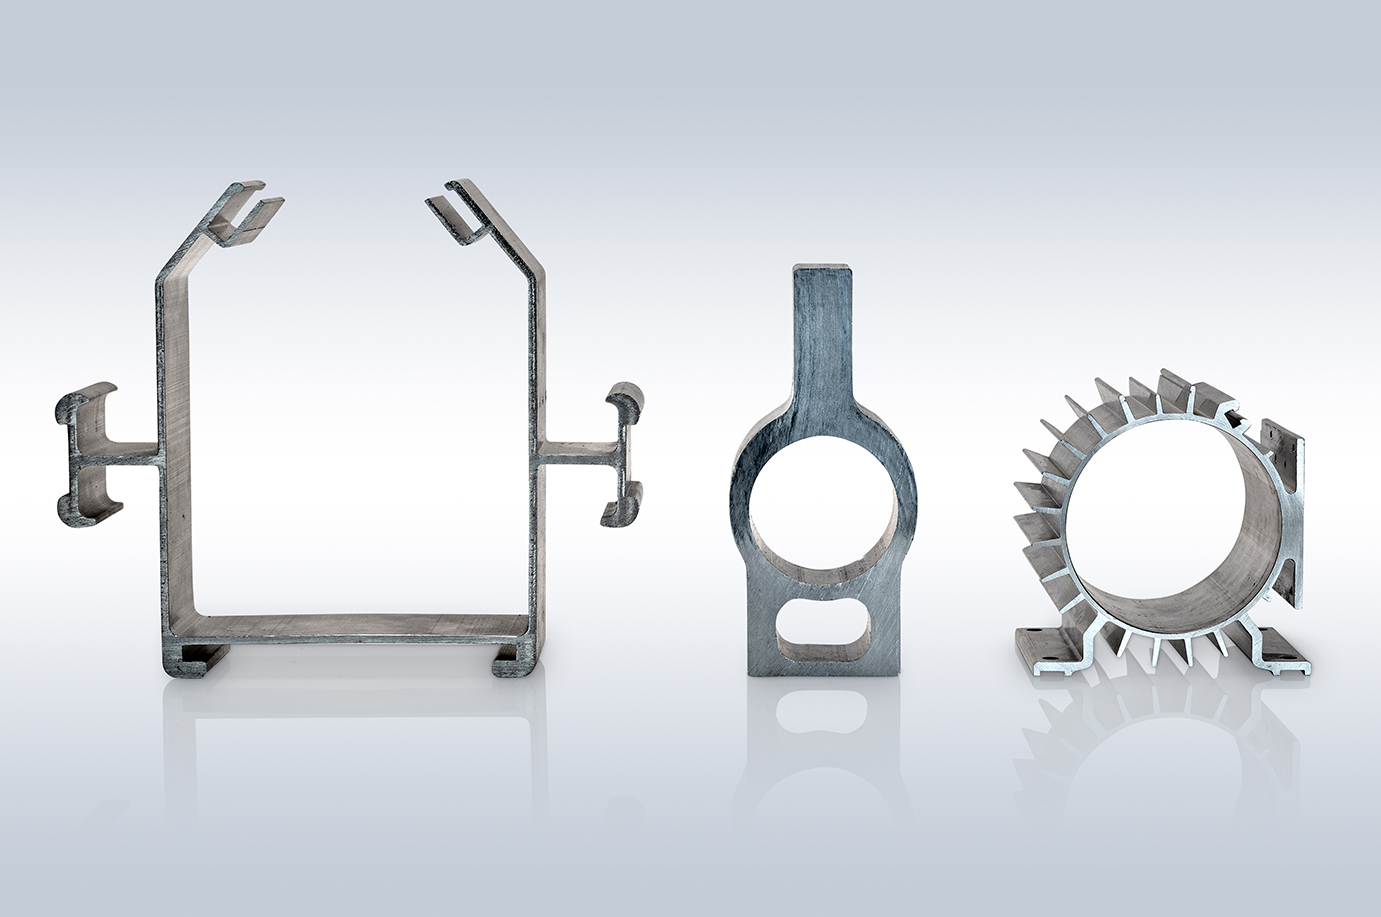 <p>IsoProfil is your experienced specialist when it comes to the production of extruded profiles. The <strong>extruded aluminium profiles</strong> are used in many different products and in almost all industries.&nbsp;</p>
<p>In comparison to the extrusion standard, which is specified according to DIN EN 12020-2 and DIN EN 755-9, we offer you profiles with a <strong>precision that is up to 20 times higher</strong>.</p>